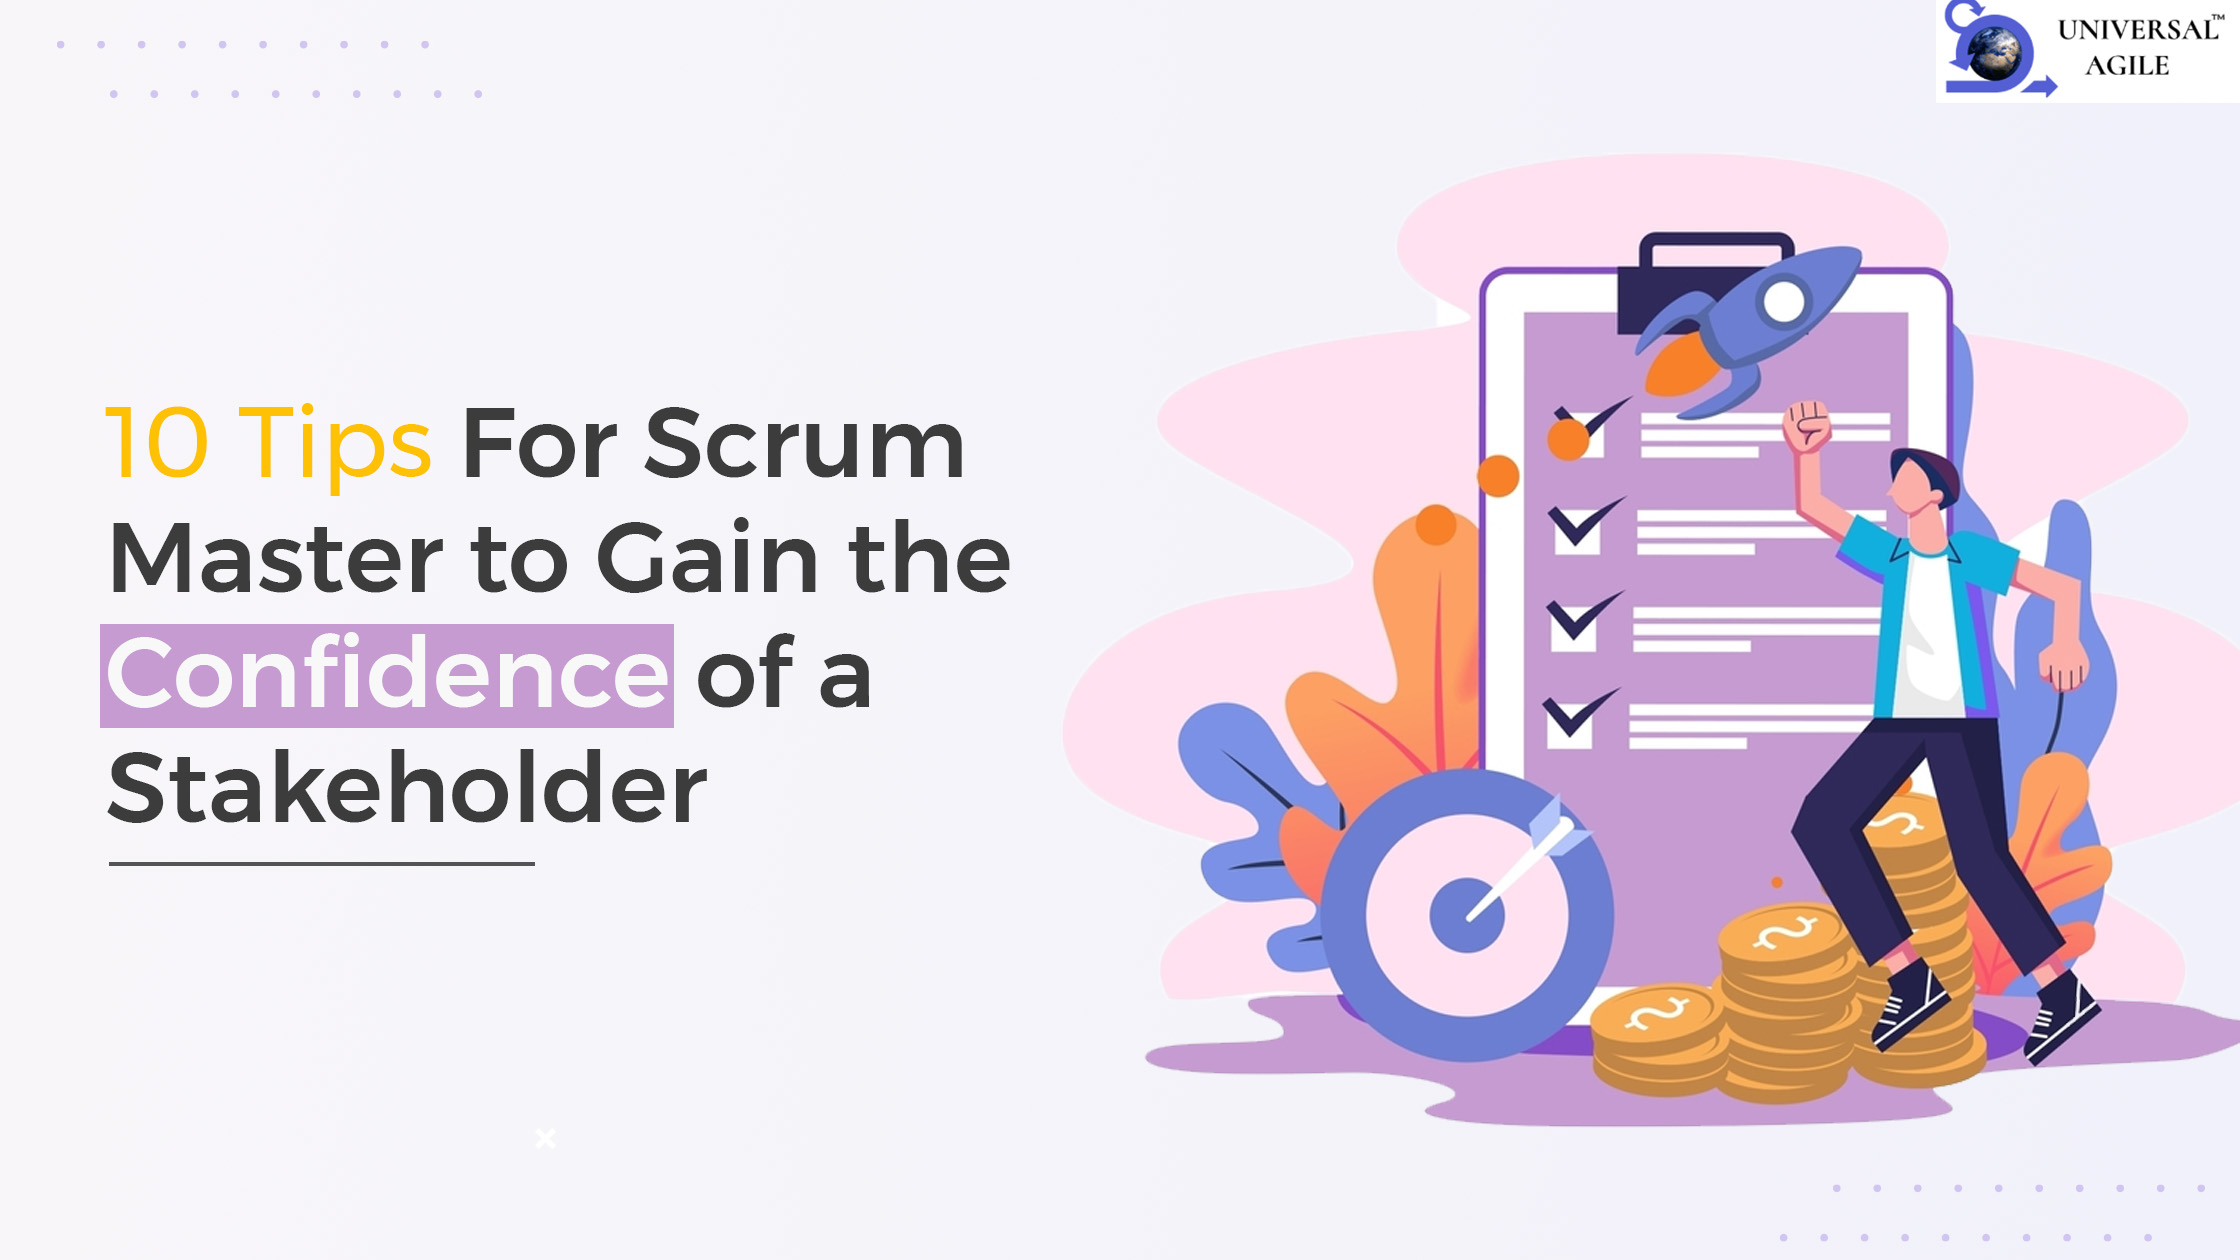 10 Tips For Scrum Master to Gain the Confidence of a Stakeholder